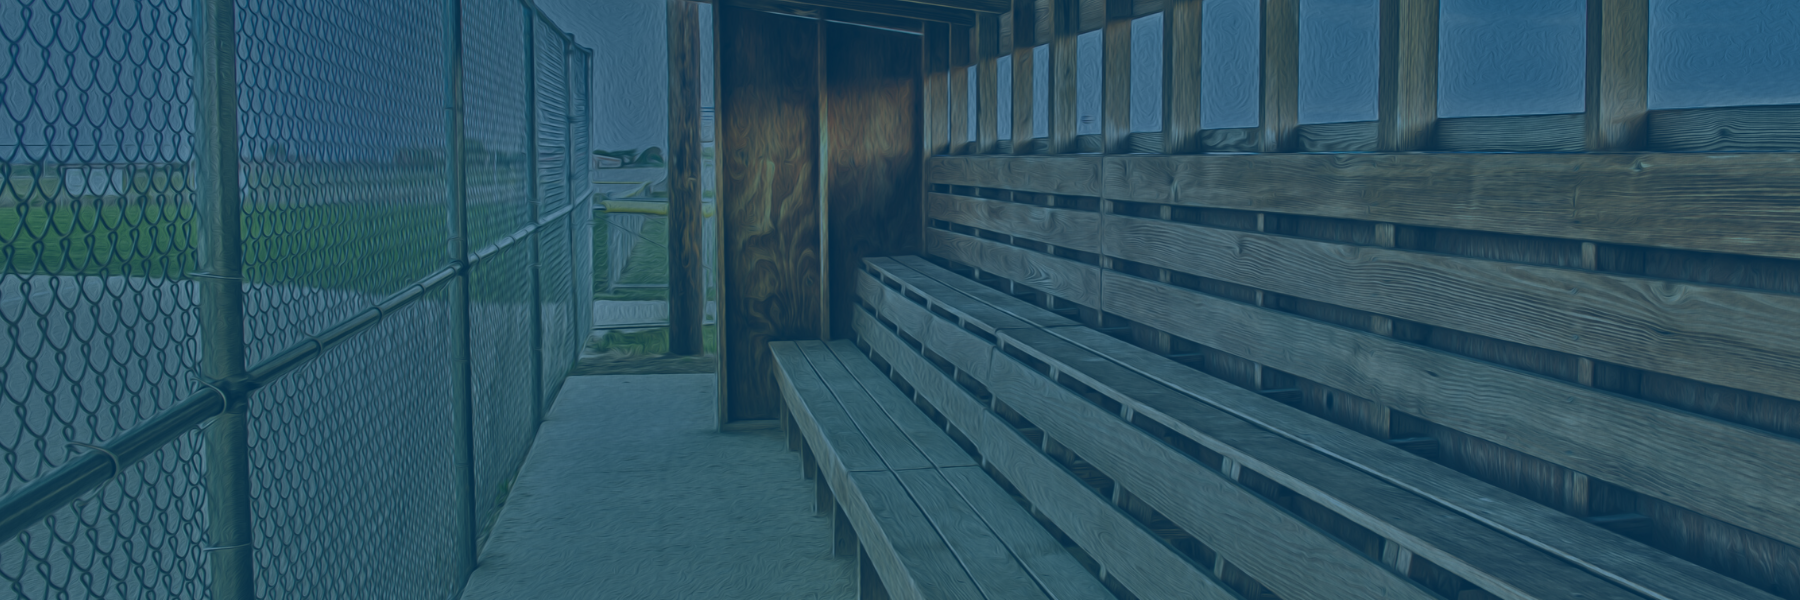 Picture of empty benches inside a baseball or softball dugout